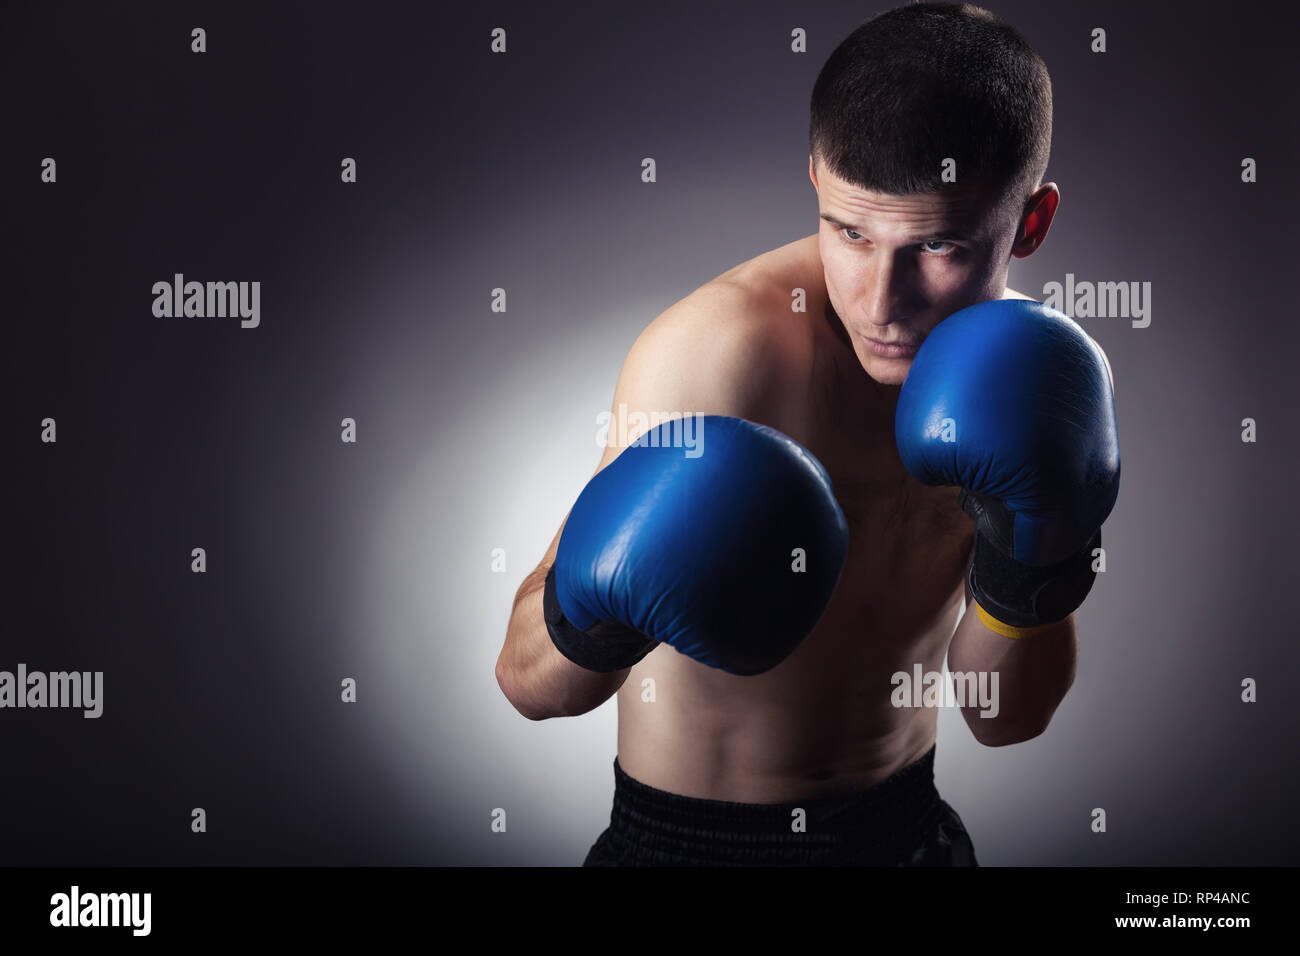 Boxing concept. Boxer with an aggressive look in blue boxing gloves before a fight against a black background Stock Photo